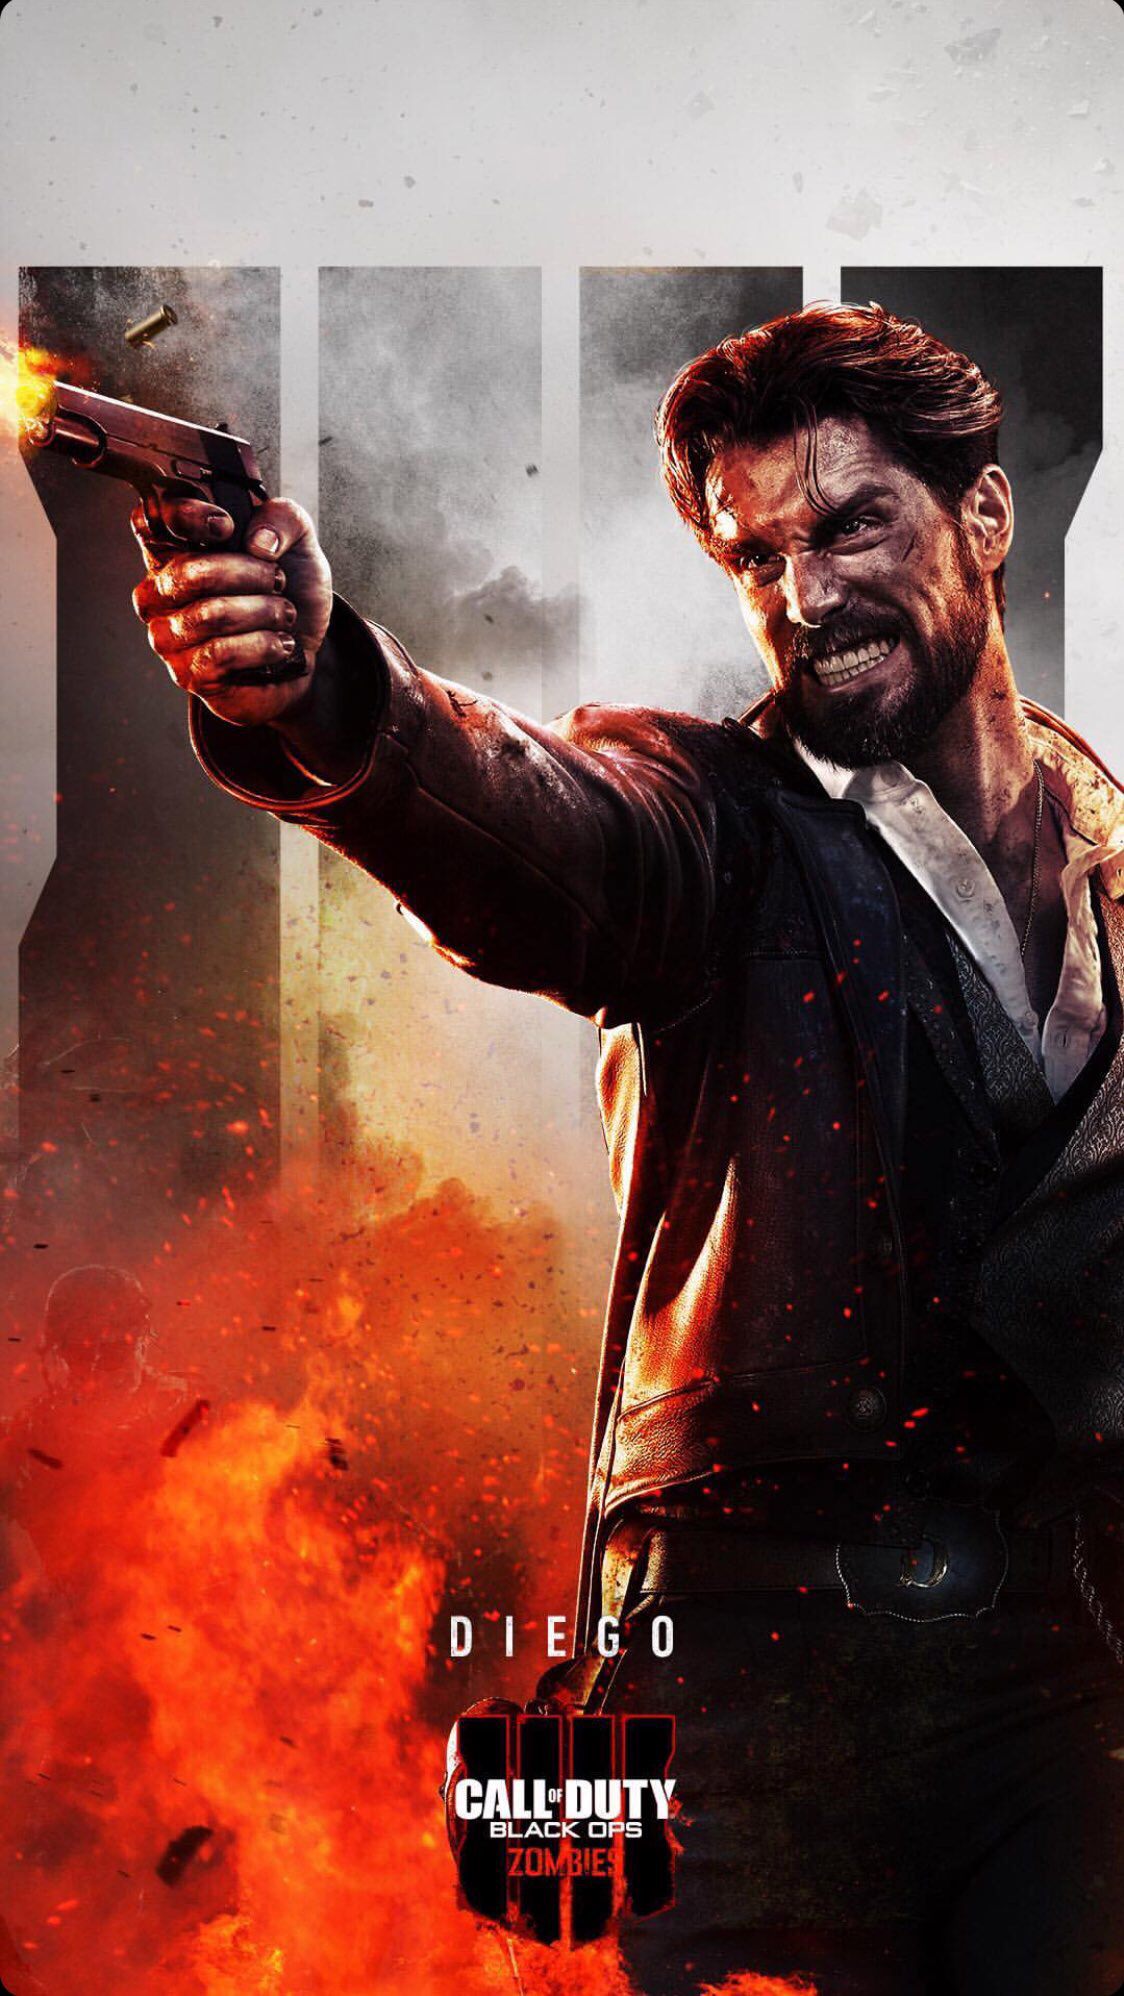 New Black Ops Zombies phone wallpapers Charlie INTEL